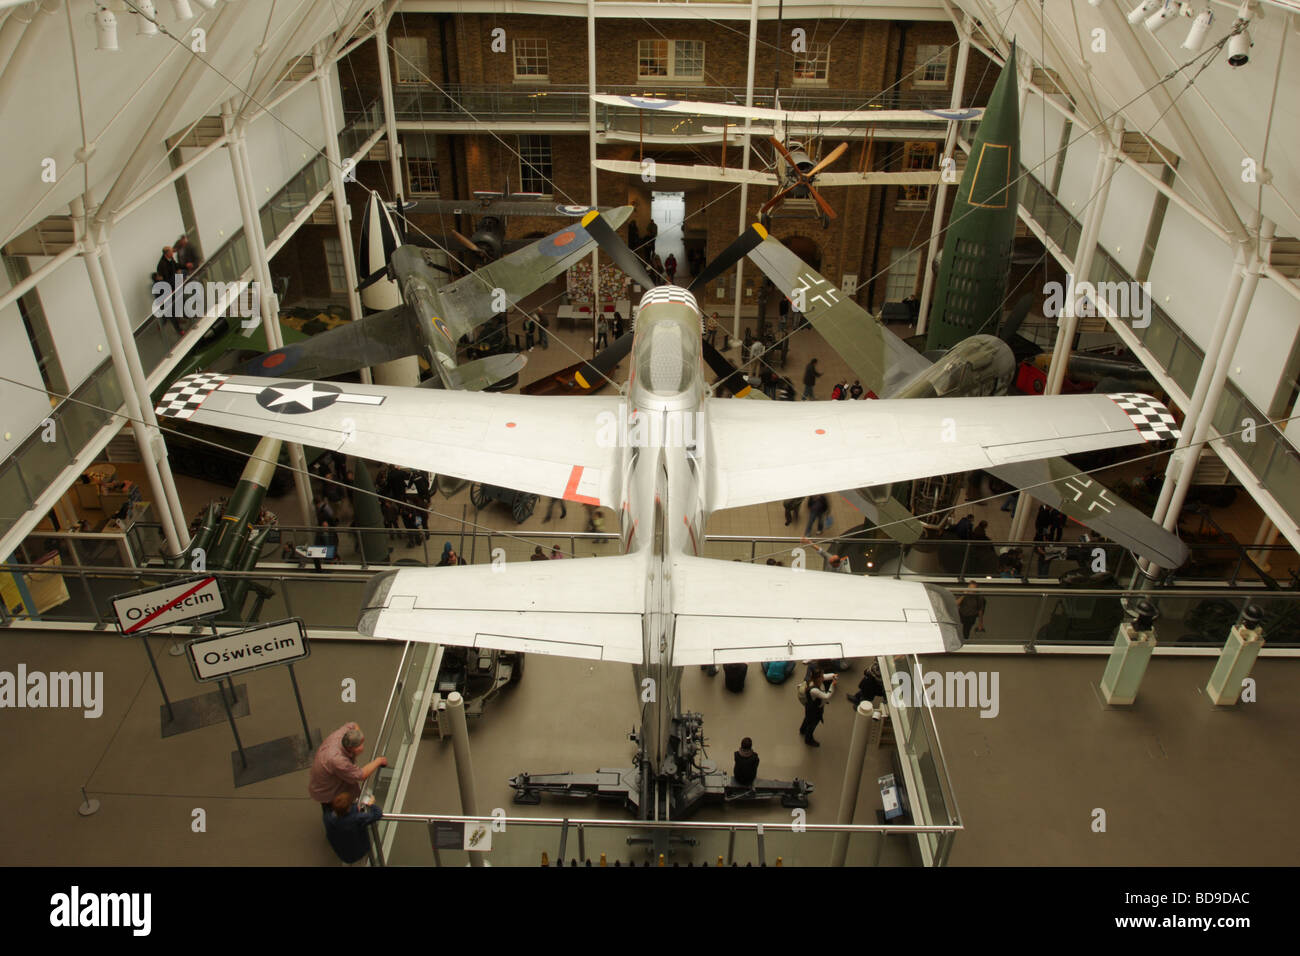 Big Beautiful Doll, P51 D Mustang aircraft suspended from The Imperial War Museum Ceiling. Stock Photo